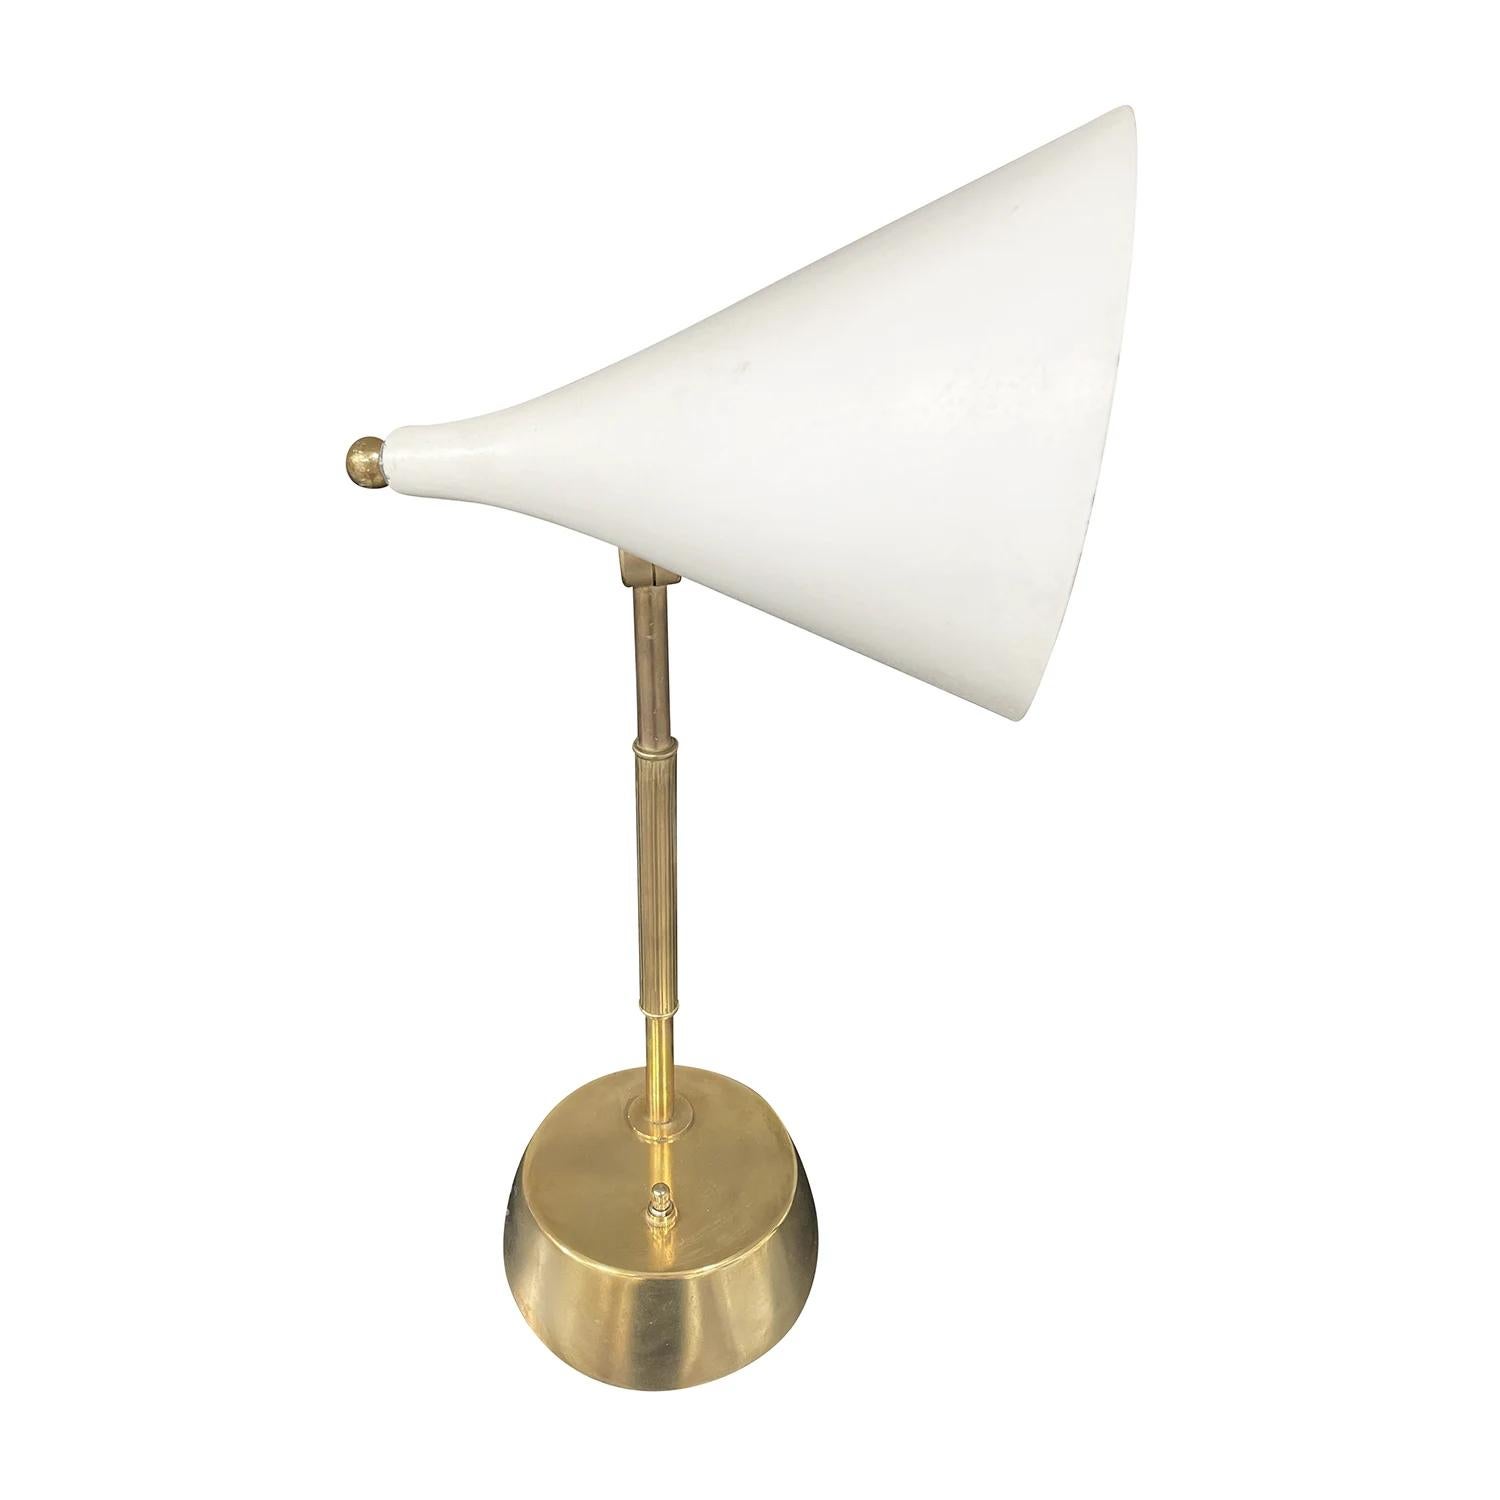 Polished 20th Century Italian Metal, Brass Desk Lamp - Vintage Lacquered Aluminum Light For Sale